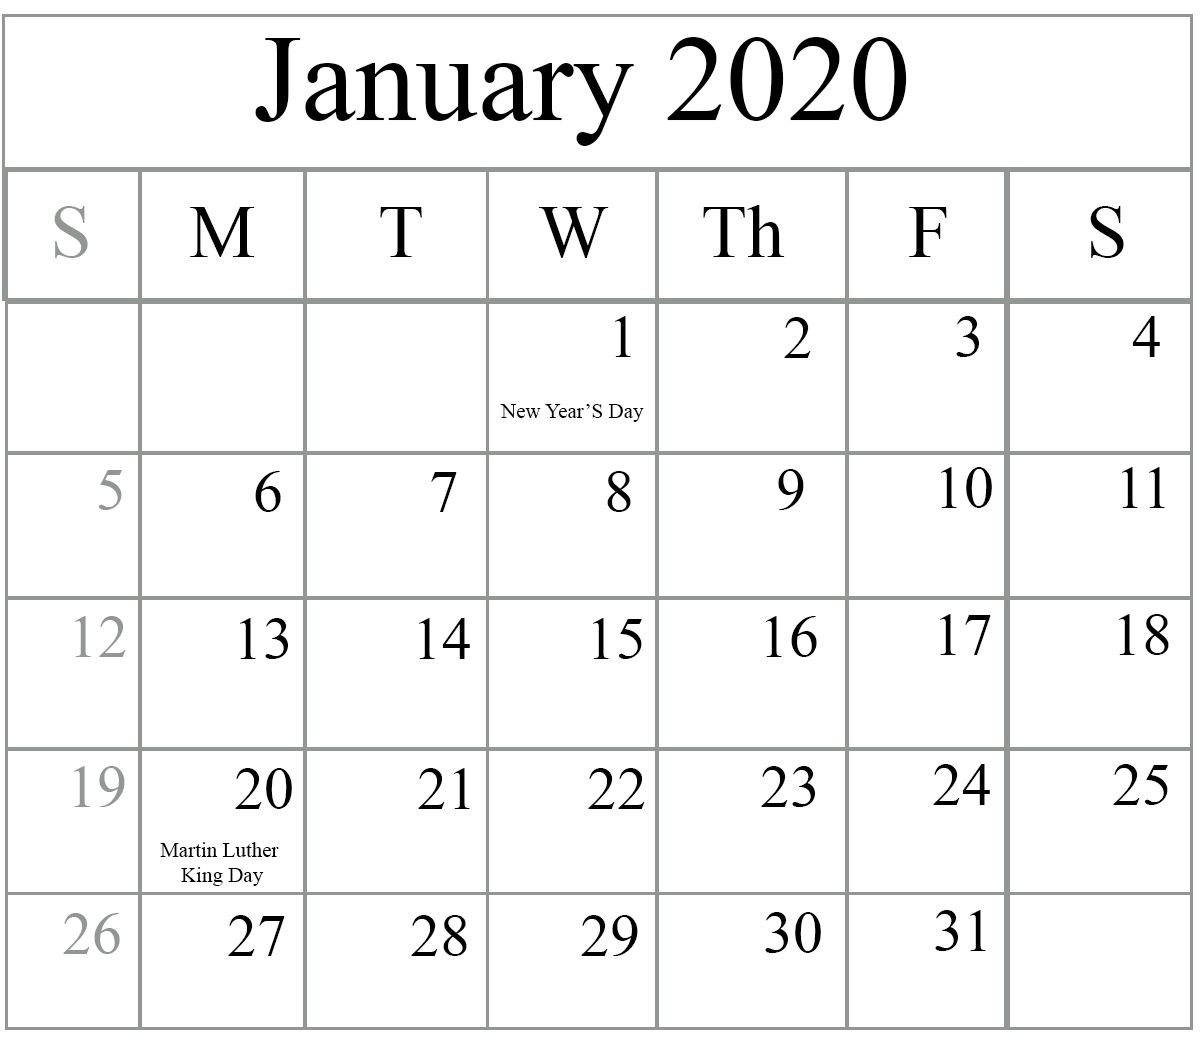 2020 Free Printable Calendars Without Downloading  Calendar for Print Free Calendars Without Downloading